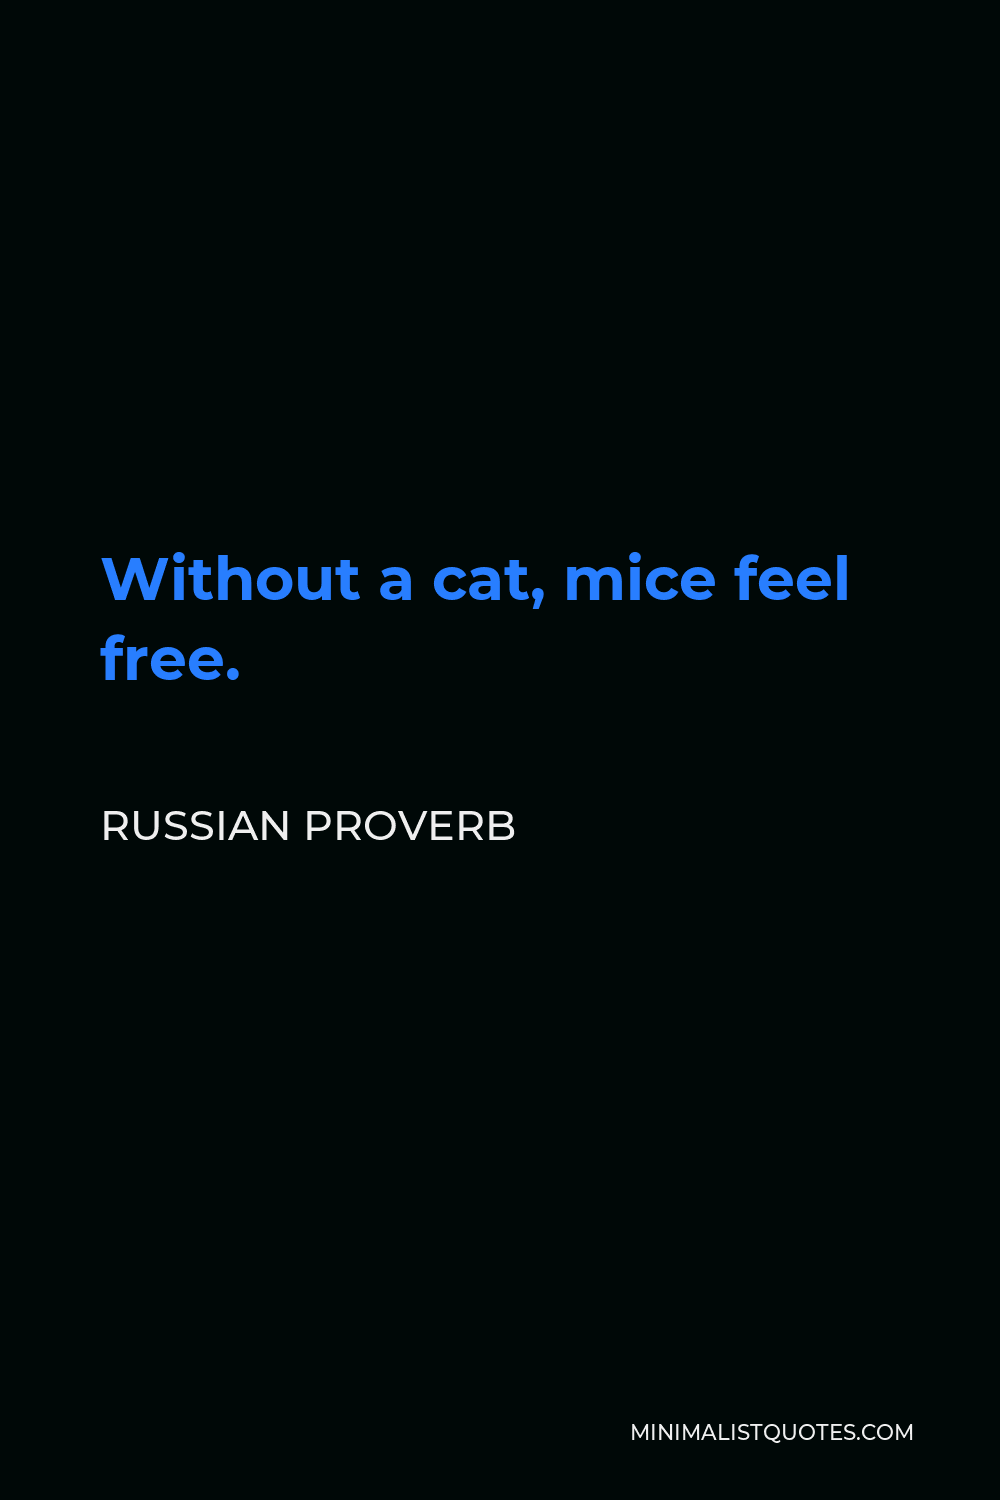 Russian Proverb Quote - Without a cat, mice feel free.